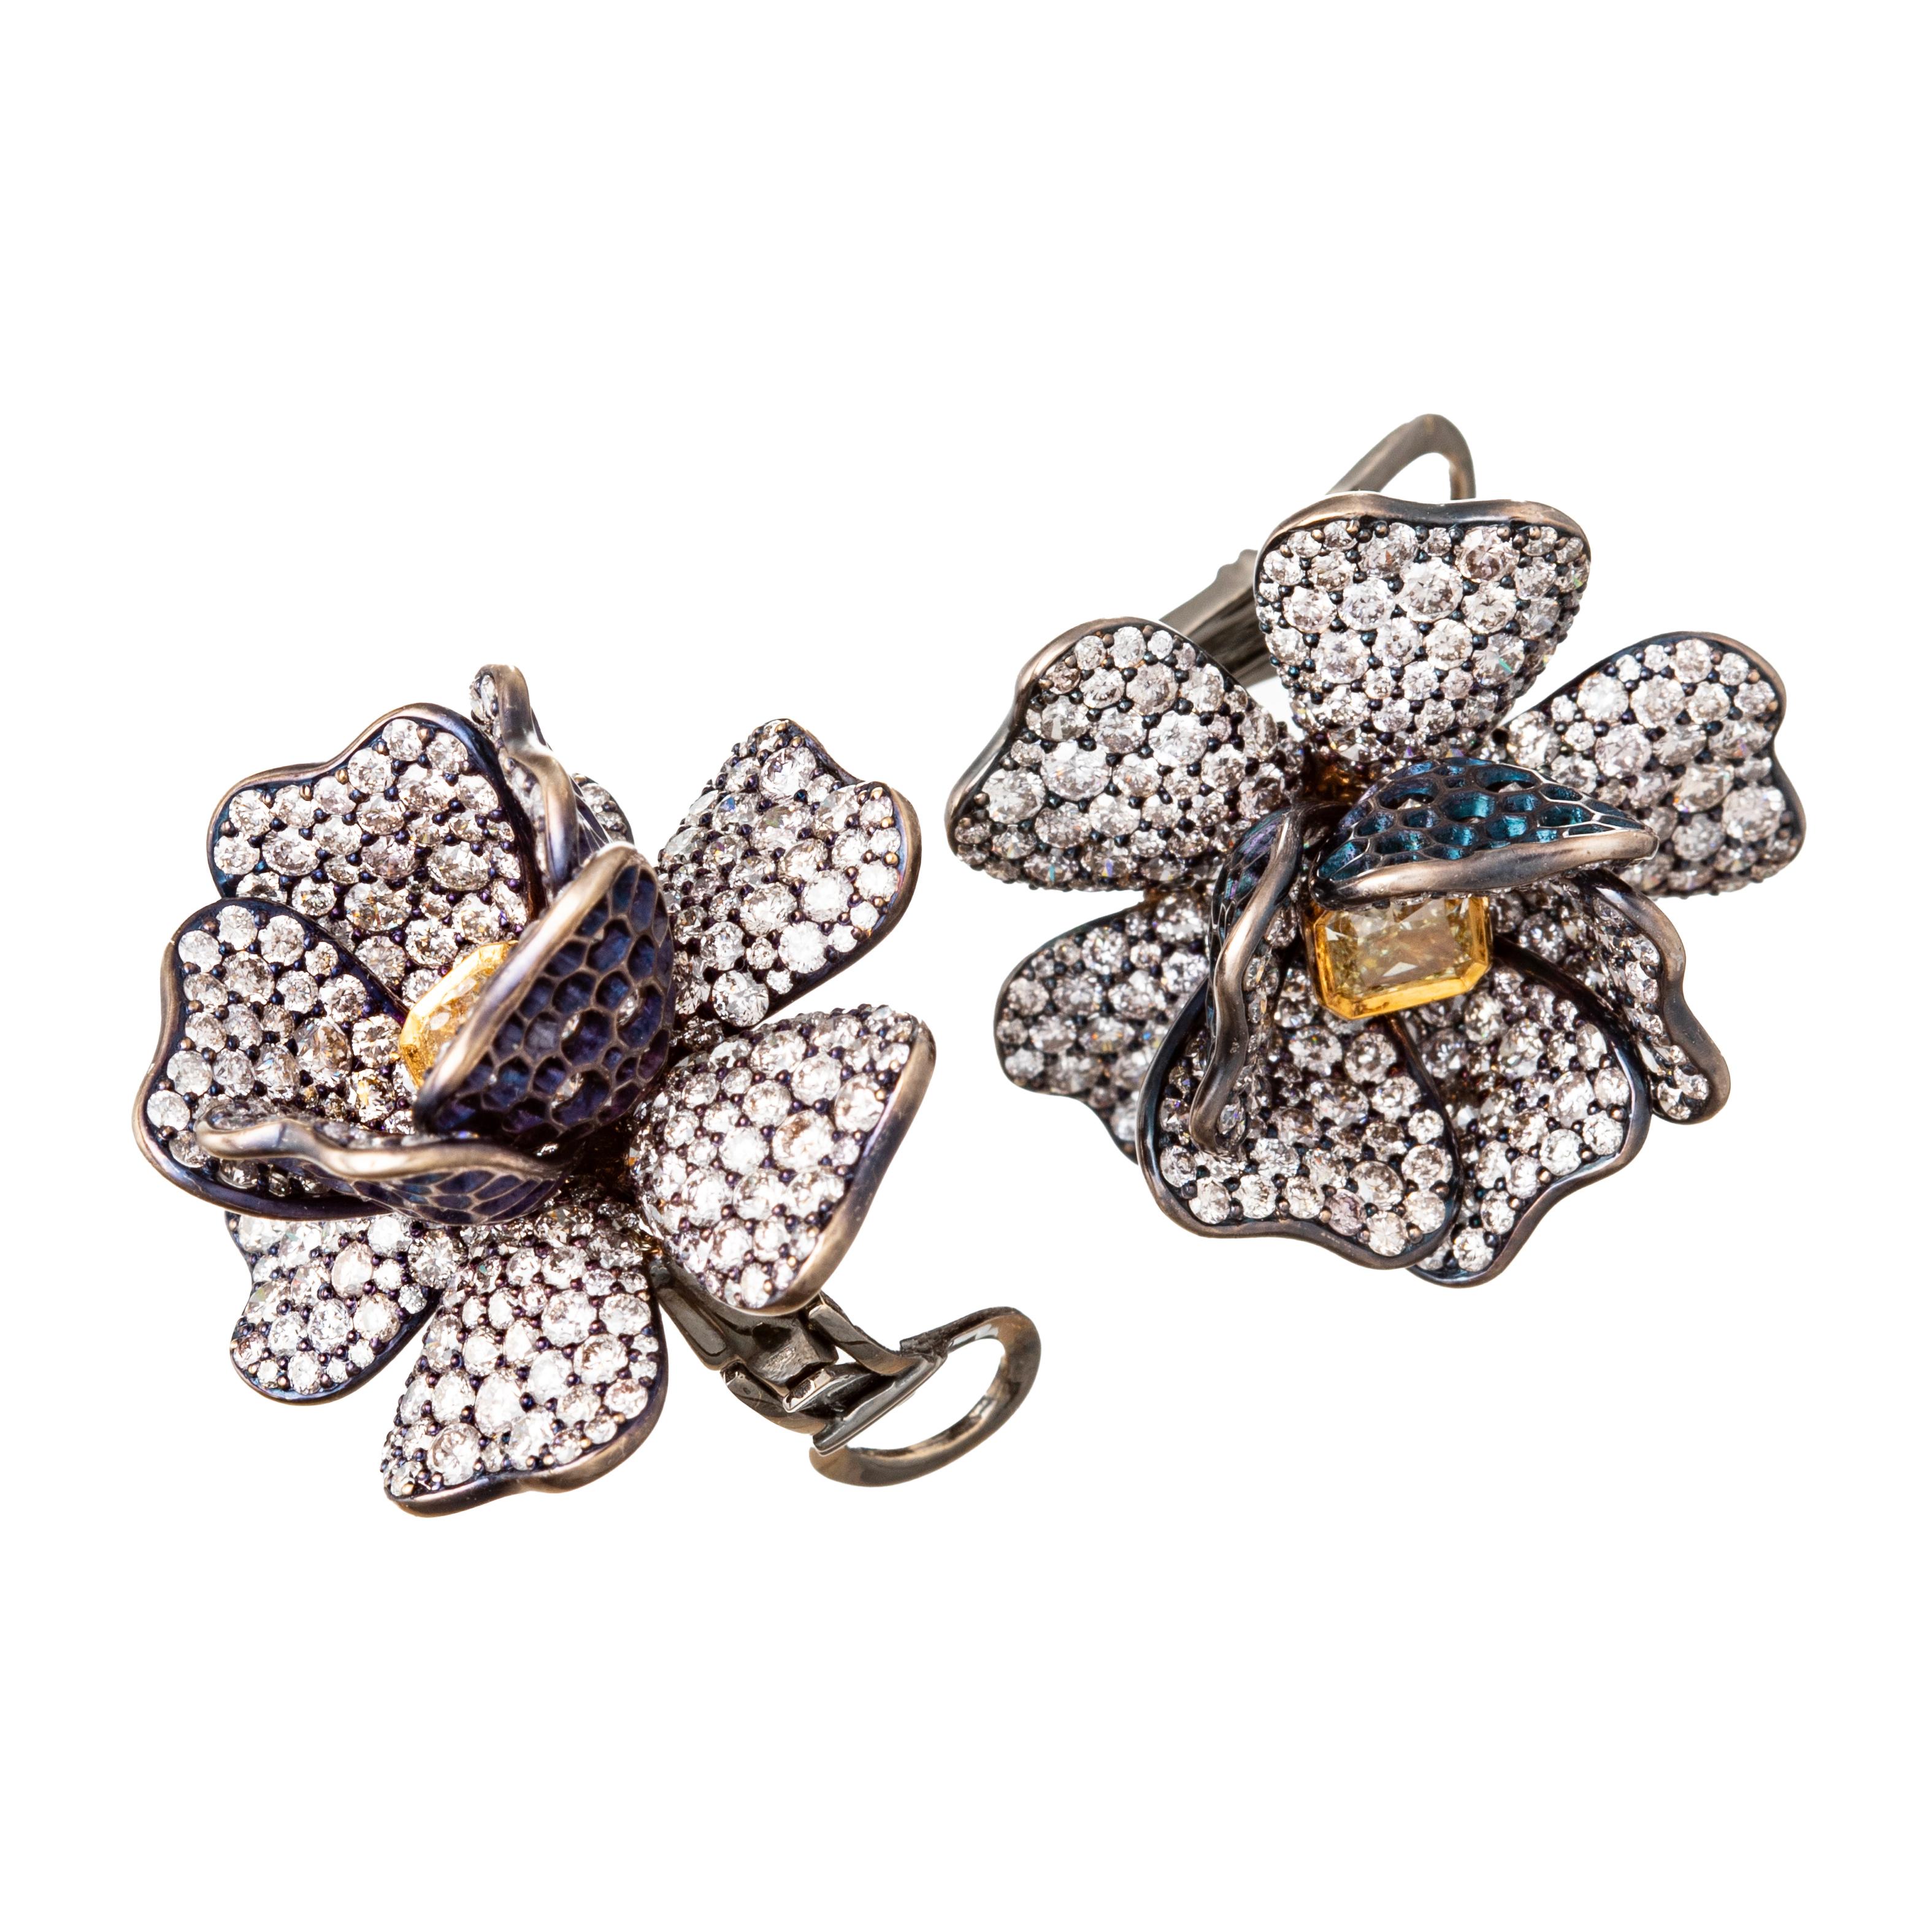 Flower earrings,  Handmade in blackened 18k gold, each centering a natural radiant-cut yellow diamond set in 18k yellow gold.   Surrounded by petals which are pavé-set throughout with white round brilliant-cut diamonds. The central fancy yellow